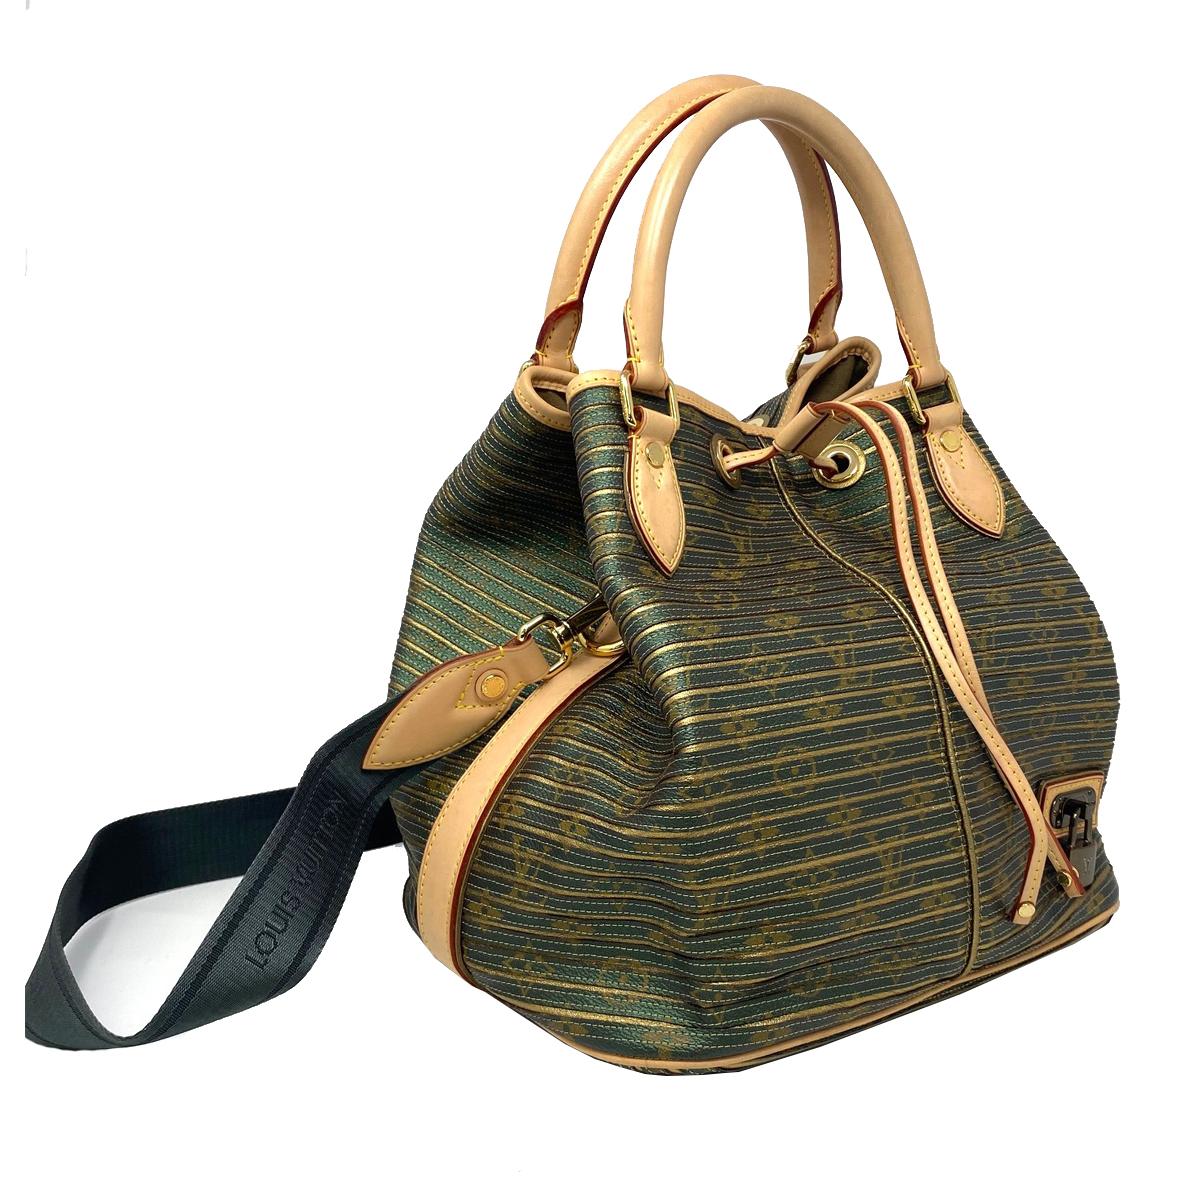 Company-Louis Vuitton
Style-Monogram Eden Neo Khaki Green Shoulder Bag   
Outside -No rips, tears or stains
Inside-small pen mark in center of bag  
Pockets-Interior pockets
Handles/ Straps-5